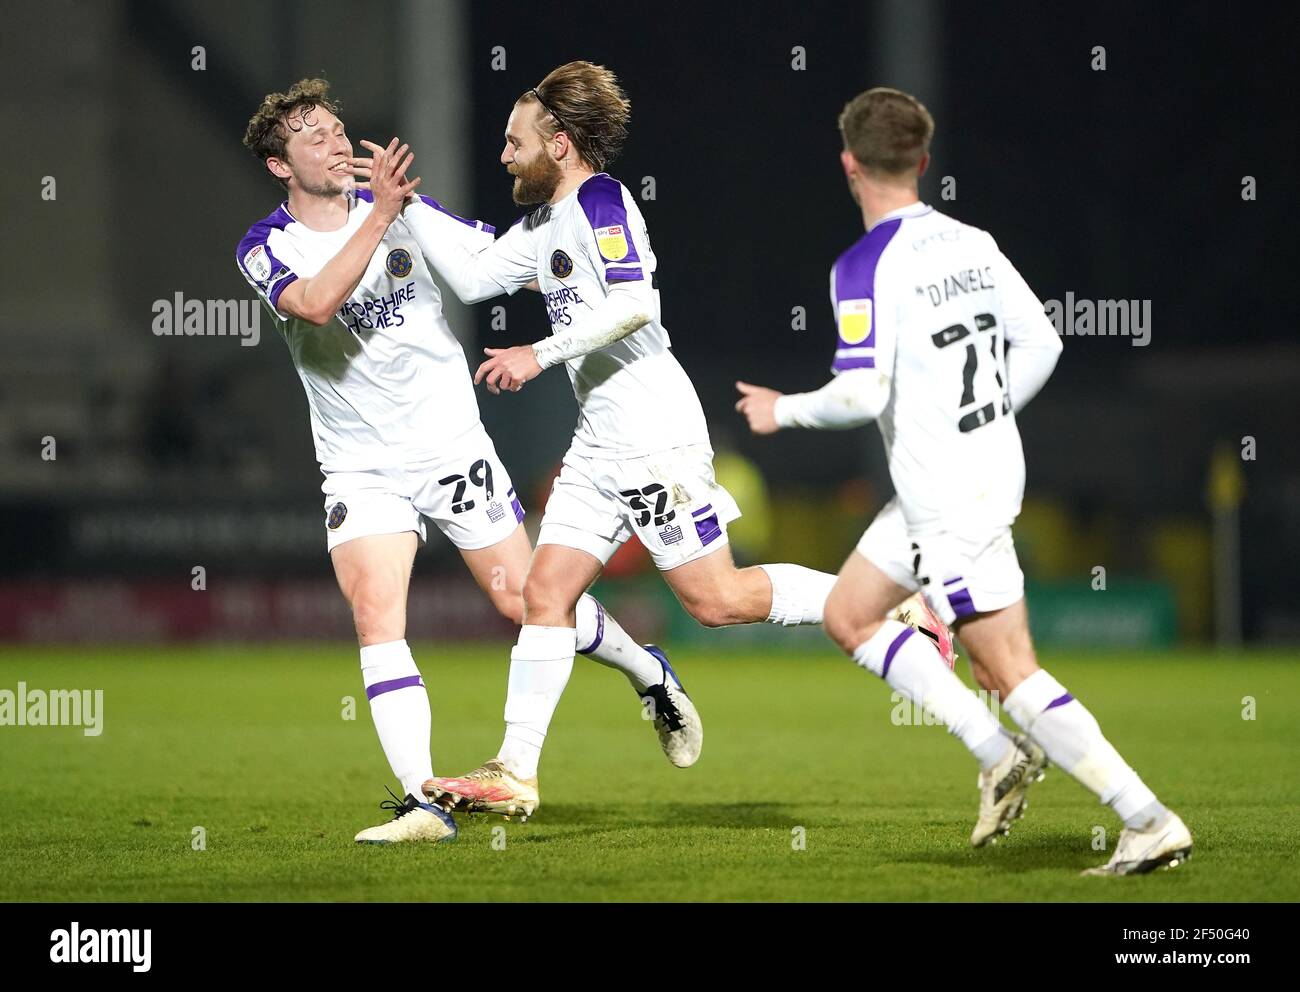 Shrewsbury Town's Harry Chapman (centre) celebrates scoring their side's second goal of the game with team-mates Matthew Pennington (left) and Josh Daniels during the Sky Bet League One match at the Pirelli Stadium, Burton upon Trent. Picture date: Tuesday March 23, 2021. Stock Photo